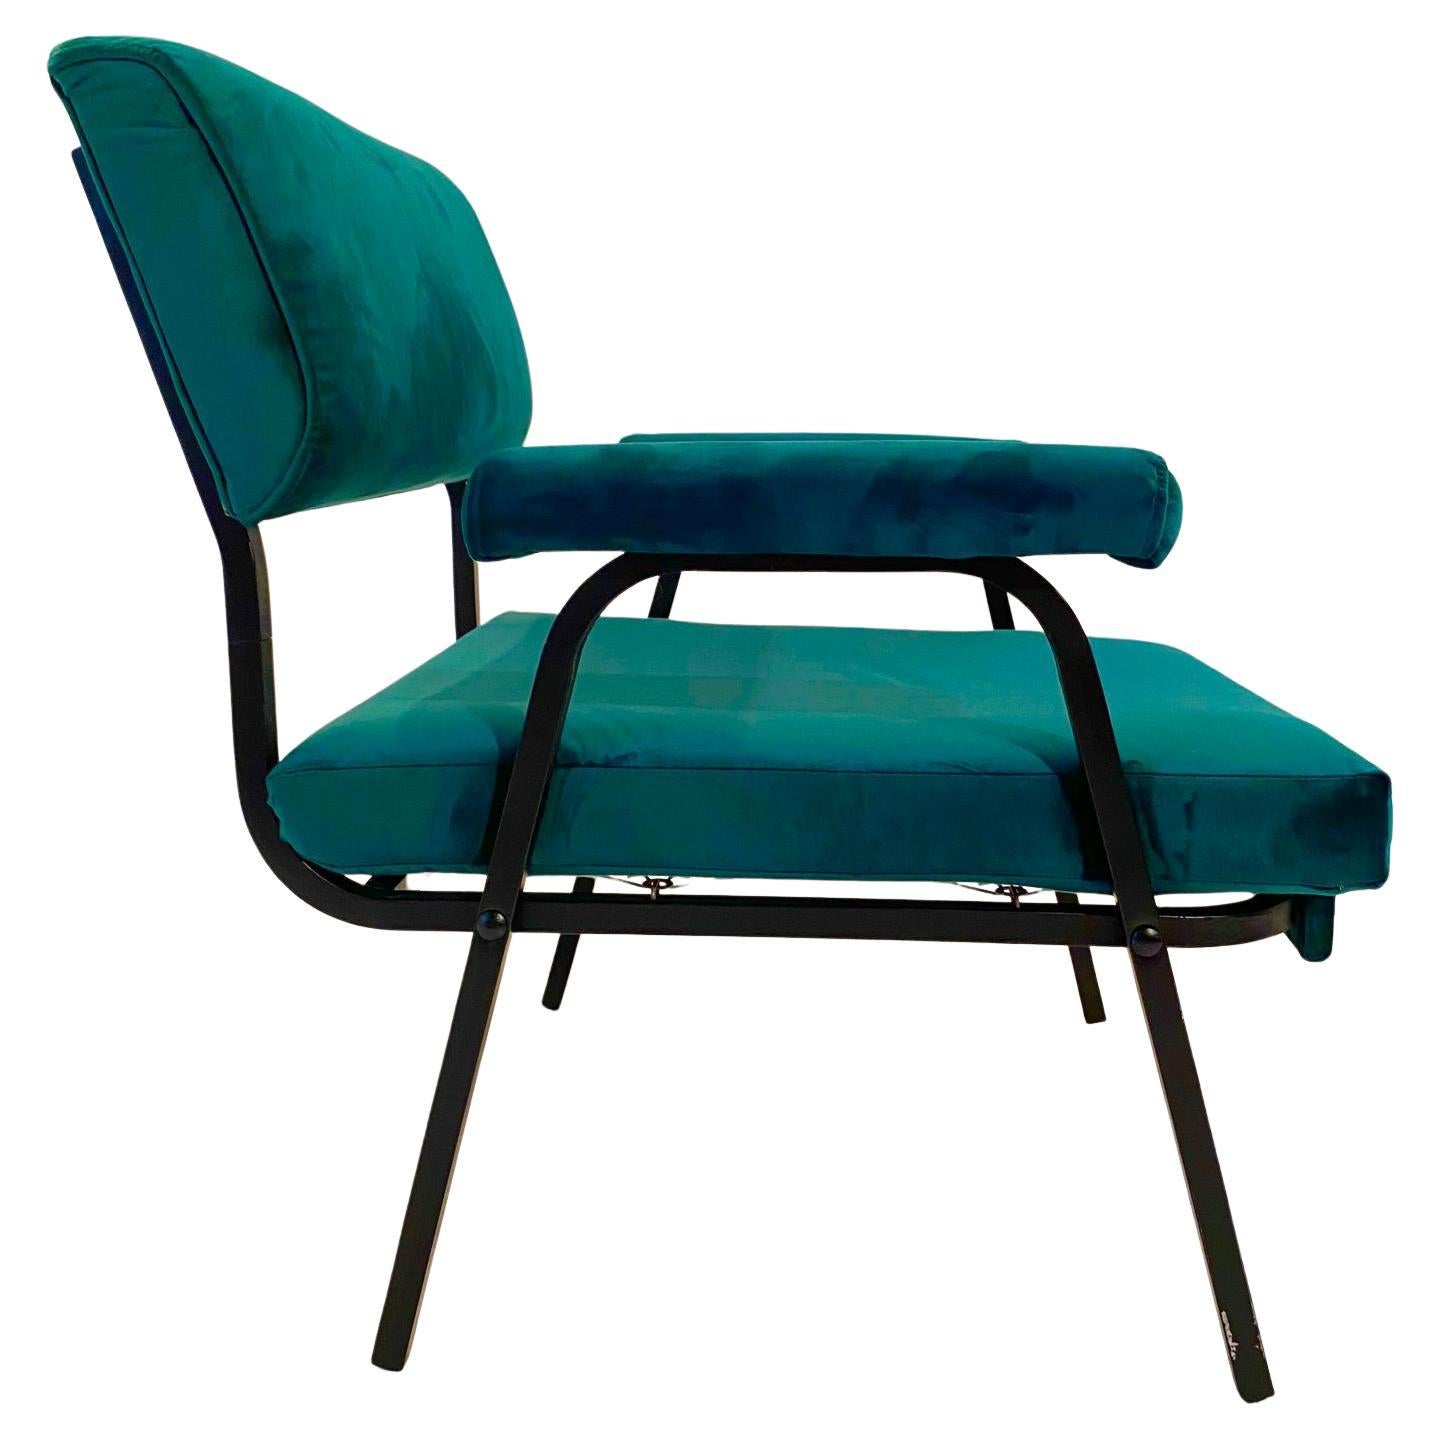 Mid-20th Century Green velvet lounge chairs, Set of Two, vintage, Italy, 1960s